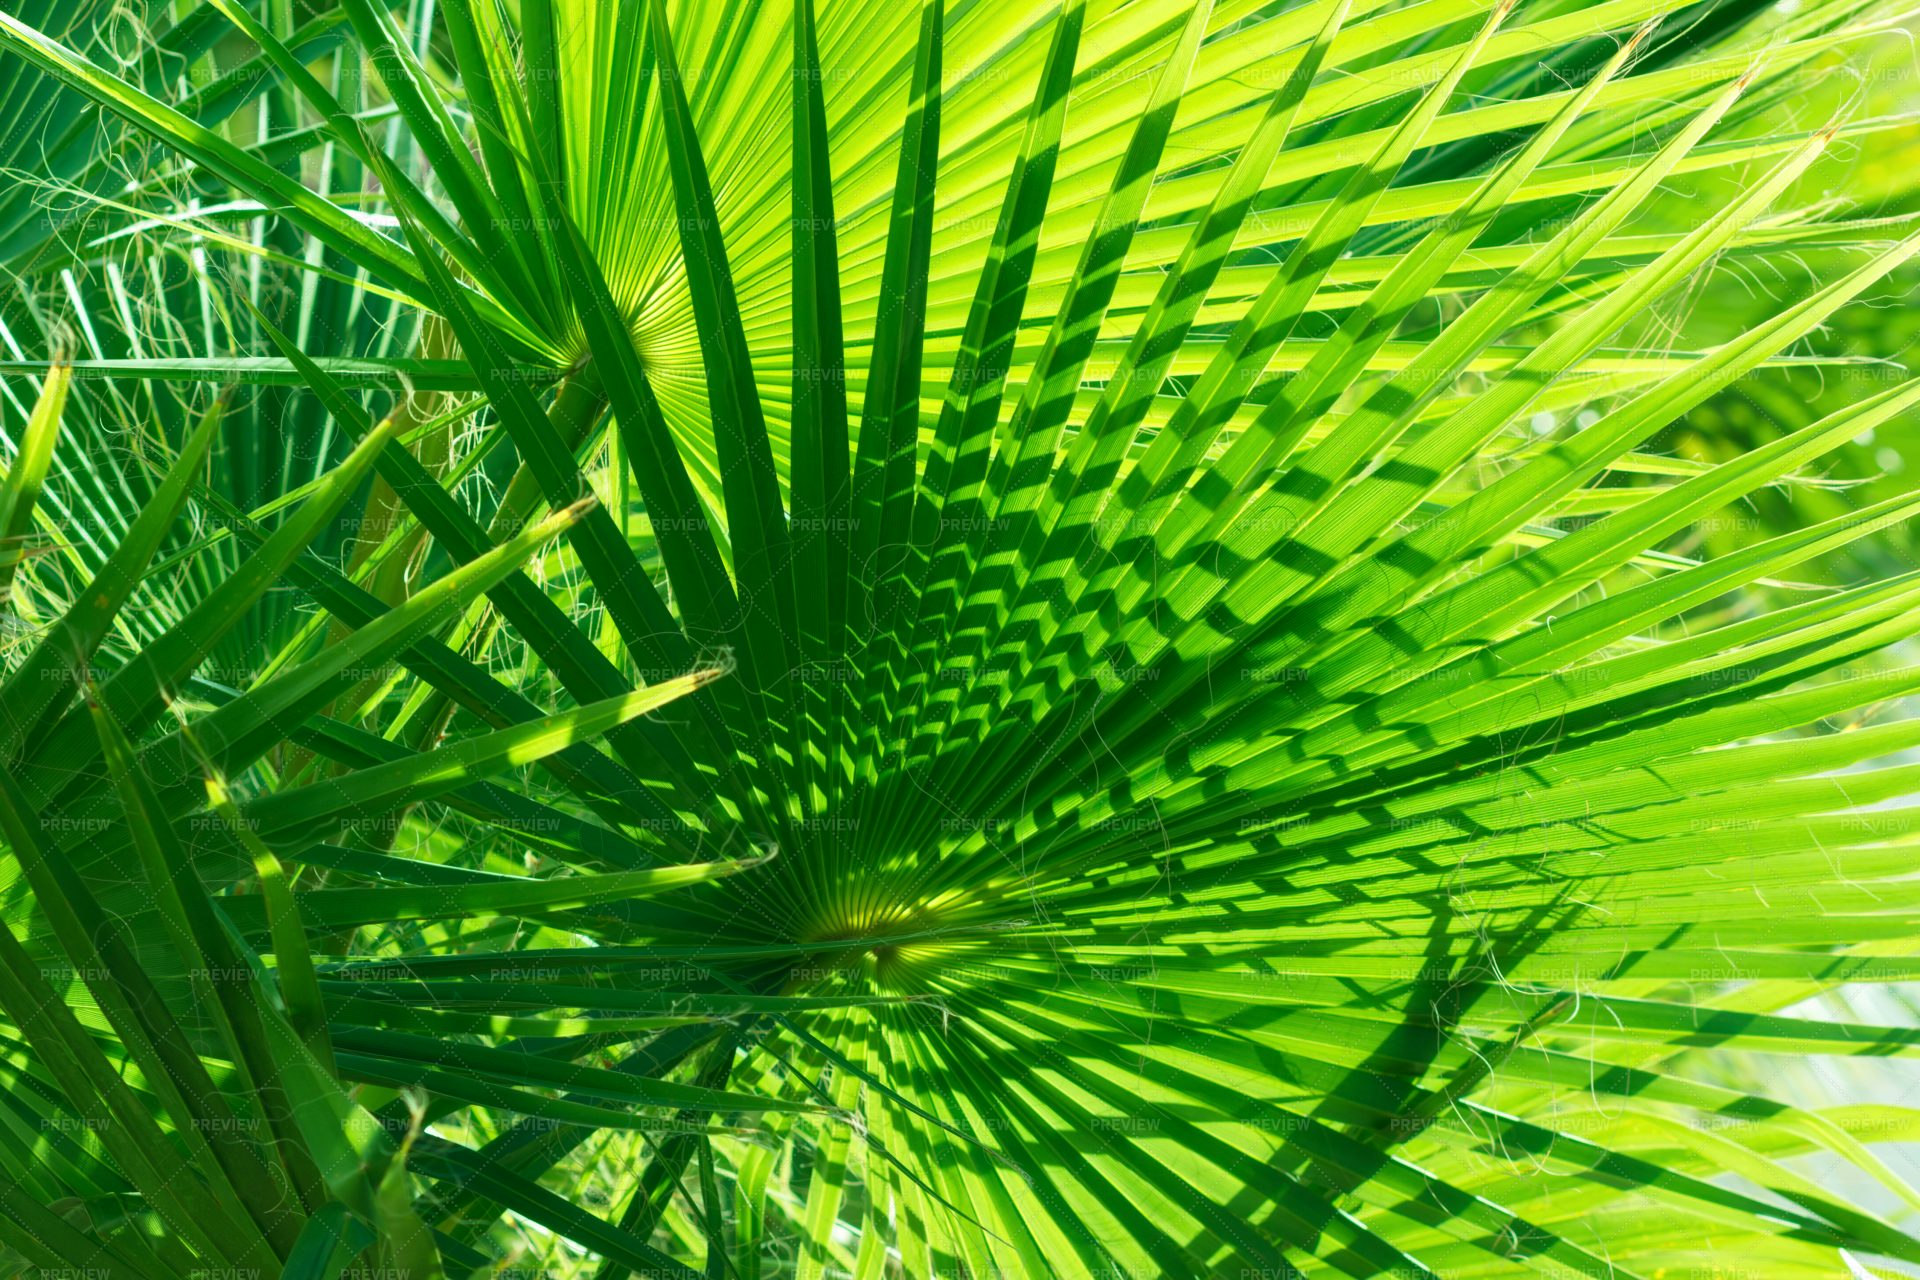 Exotic Green Leaves - Stock Photos | Motion Array